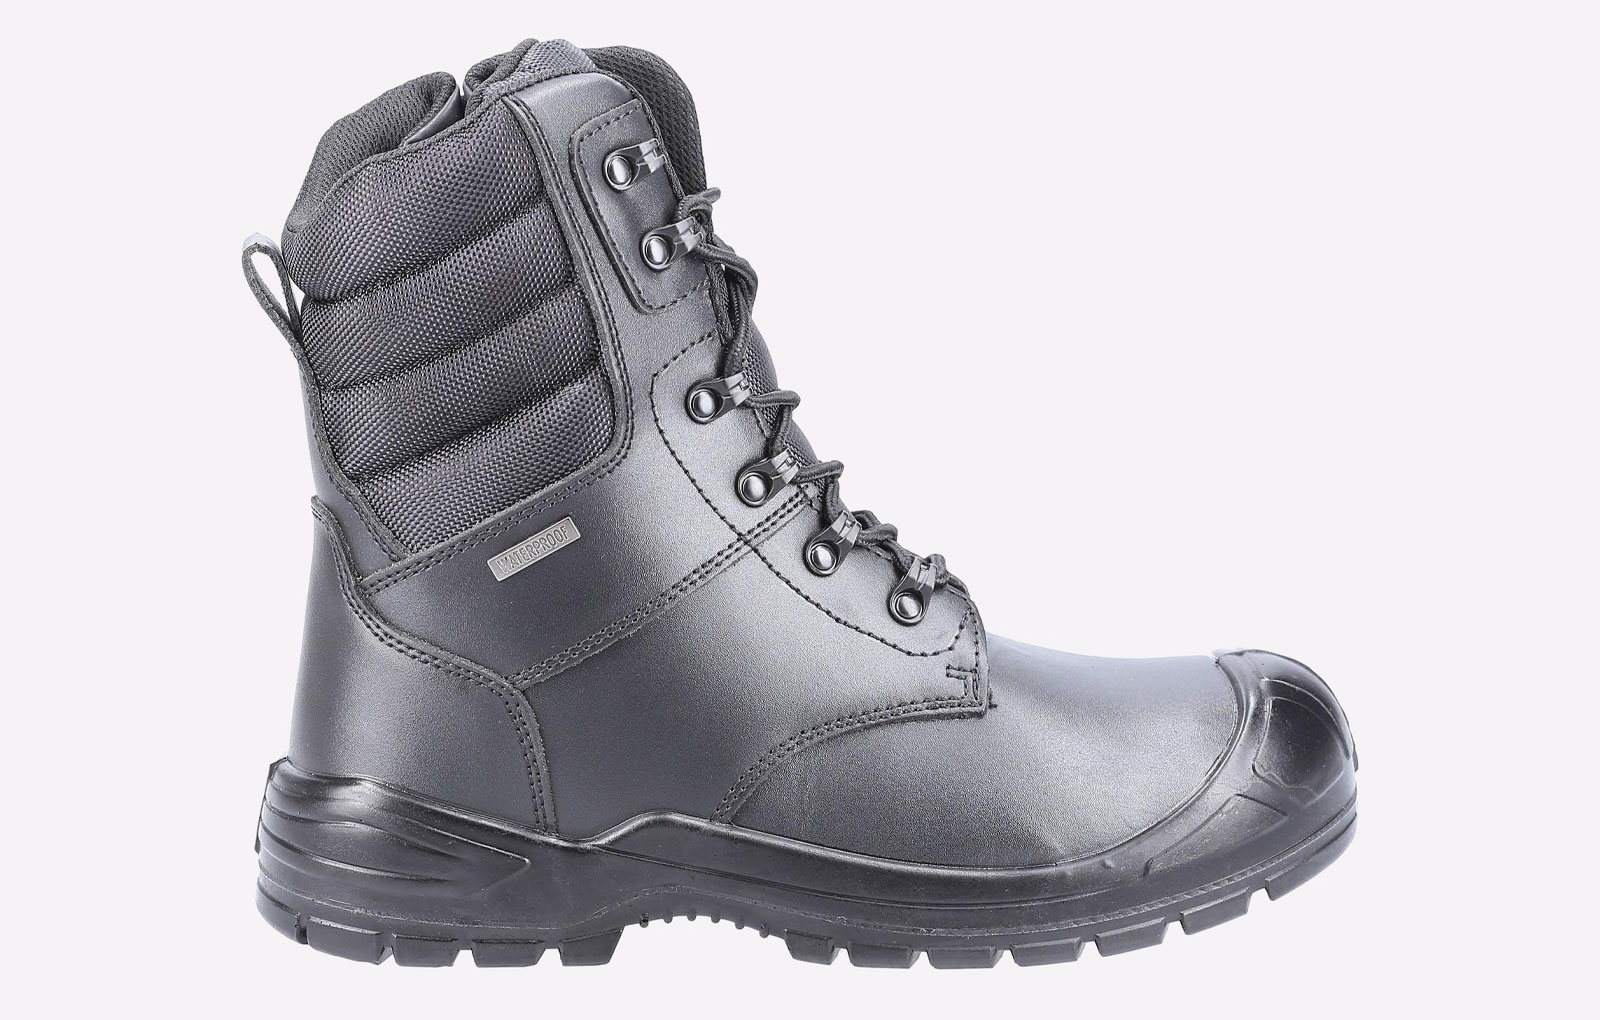 Details about   Amblers FS301 Water Resistant Safety Mens Black S3 Steel Toe Cap Boots UK6-12 